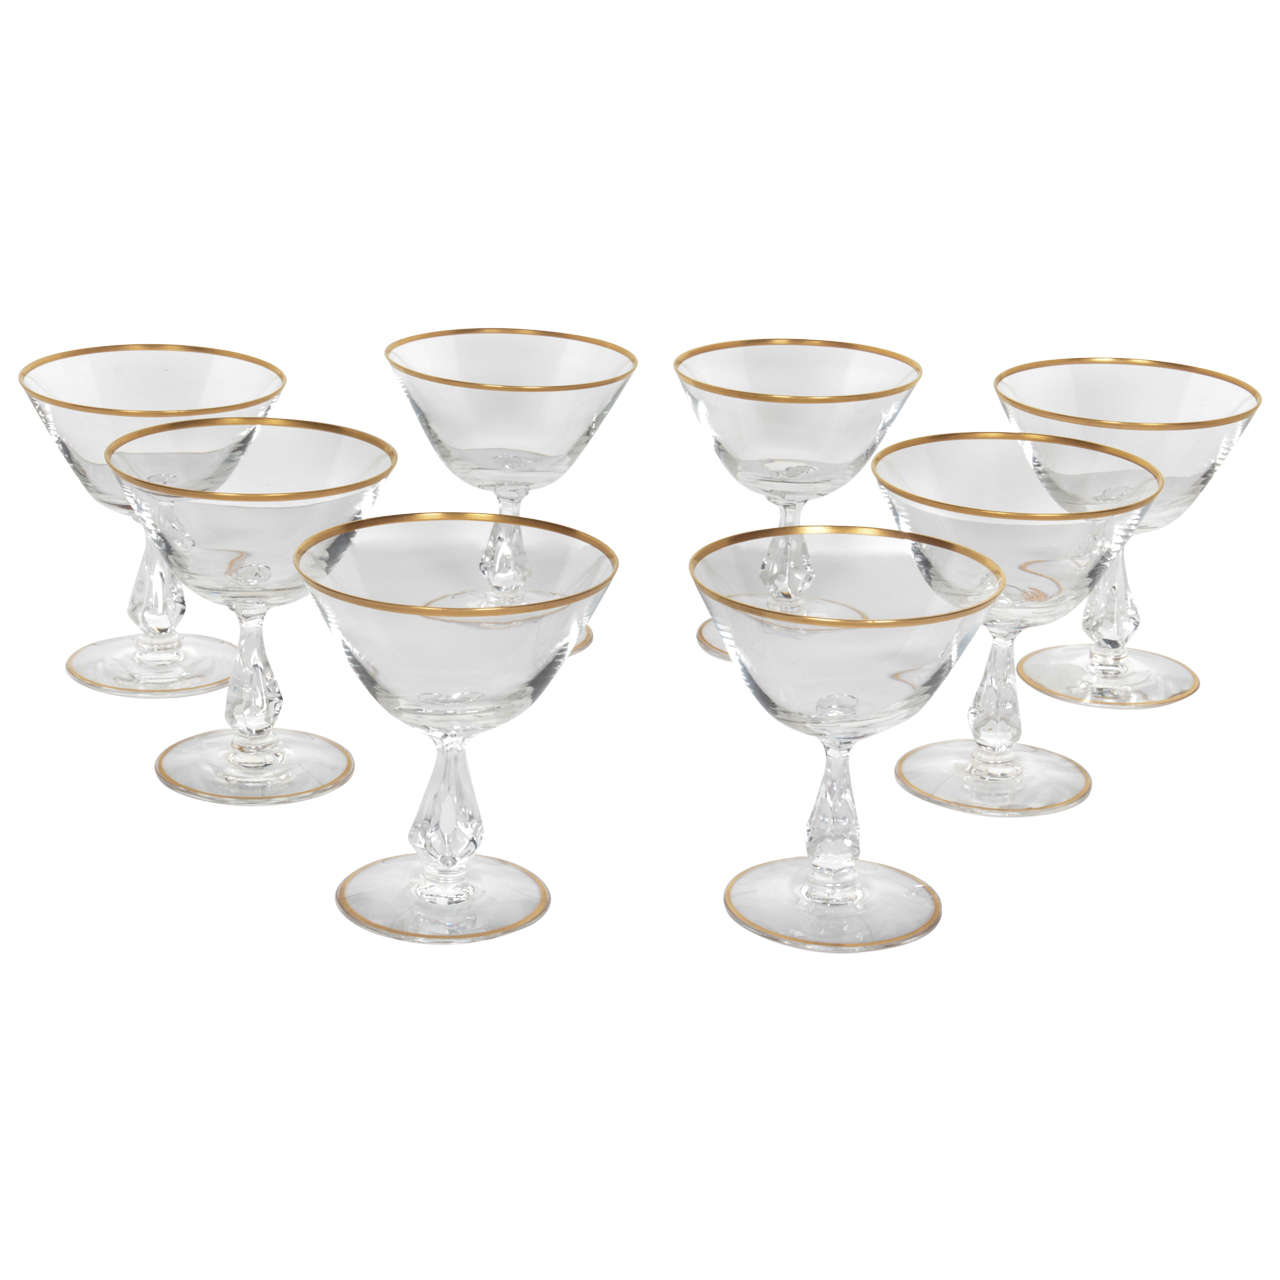 Set of Four Mid-Century Cocktail Champagne Glasses with Gold Rim